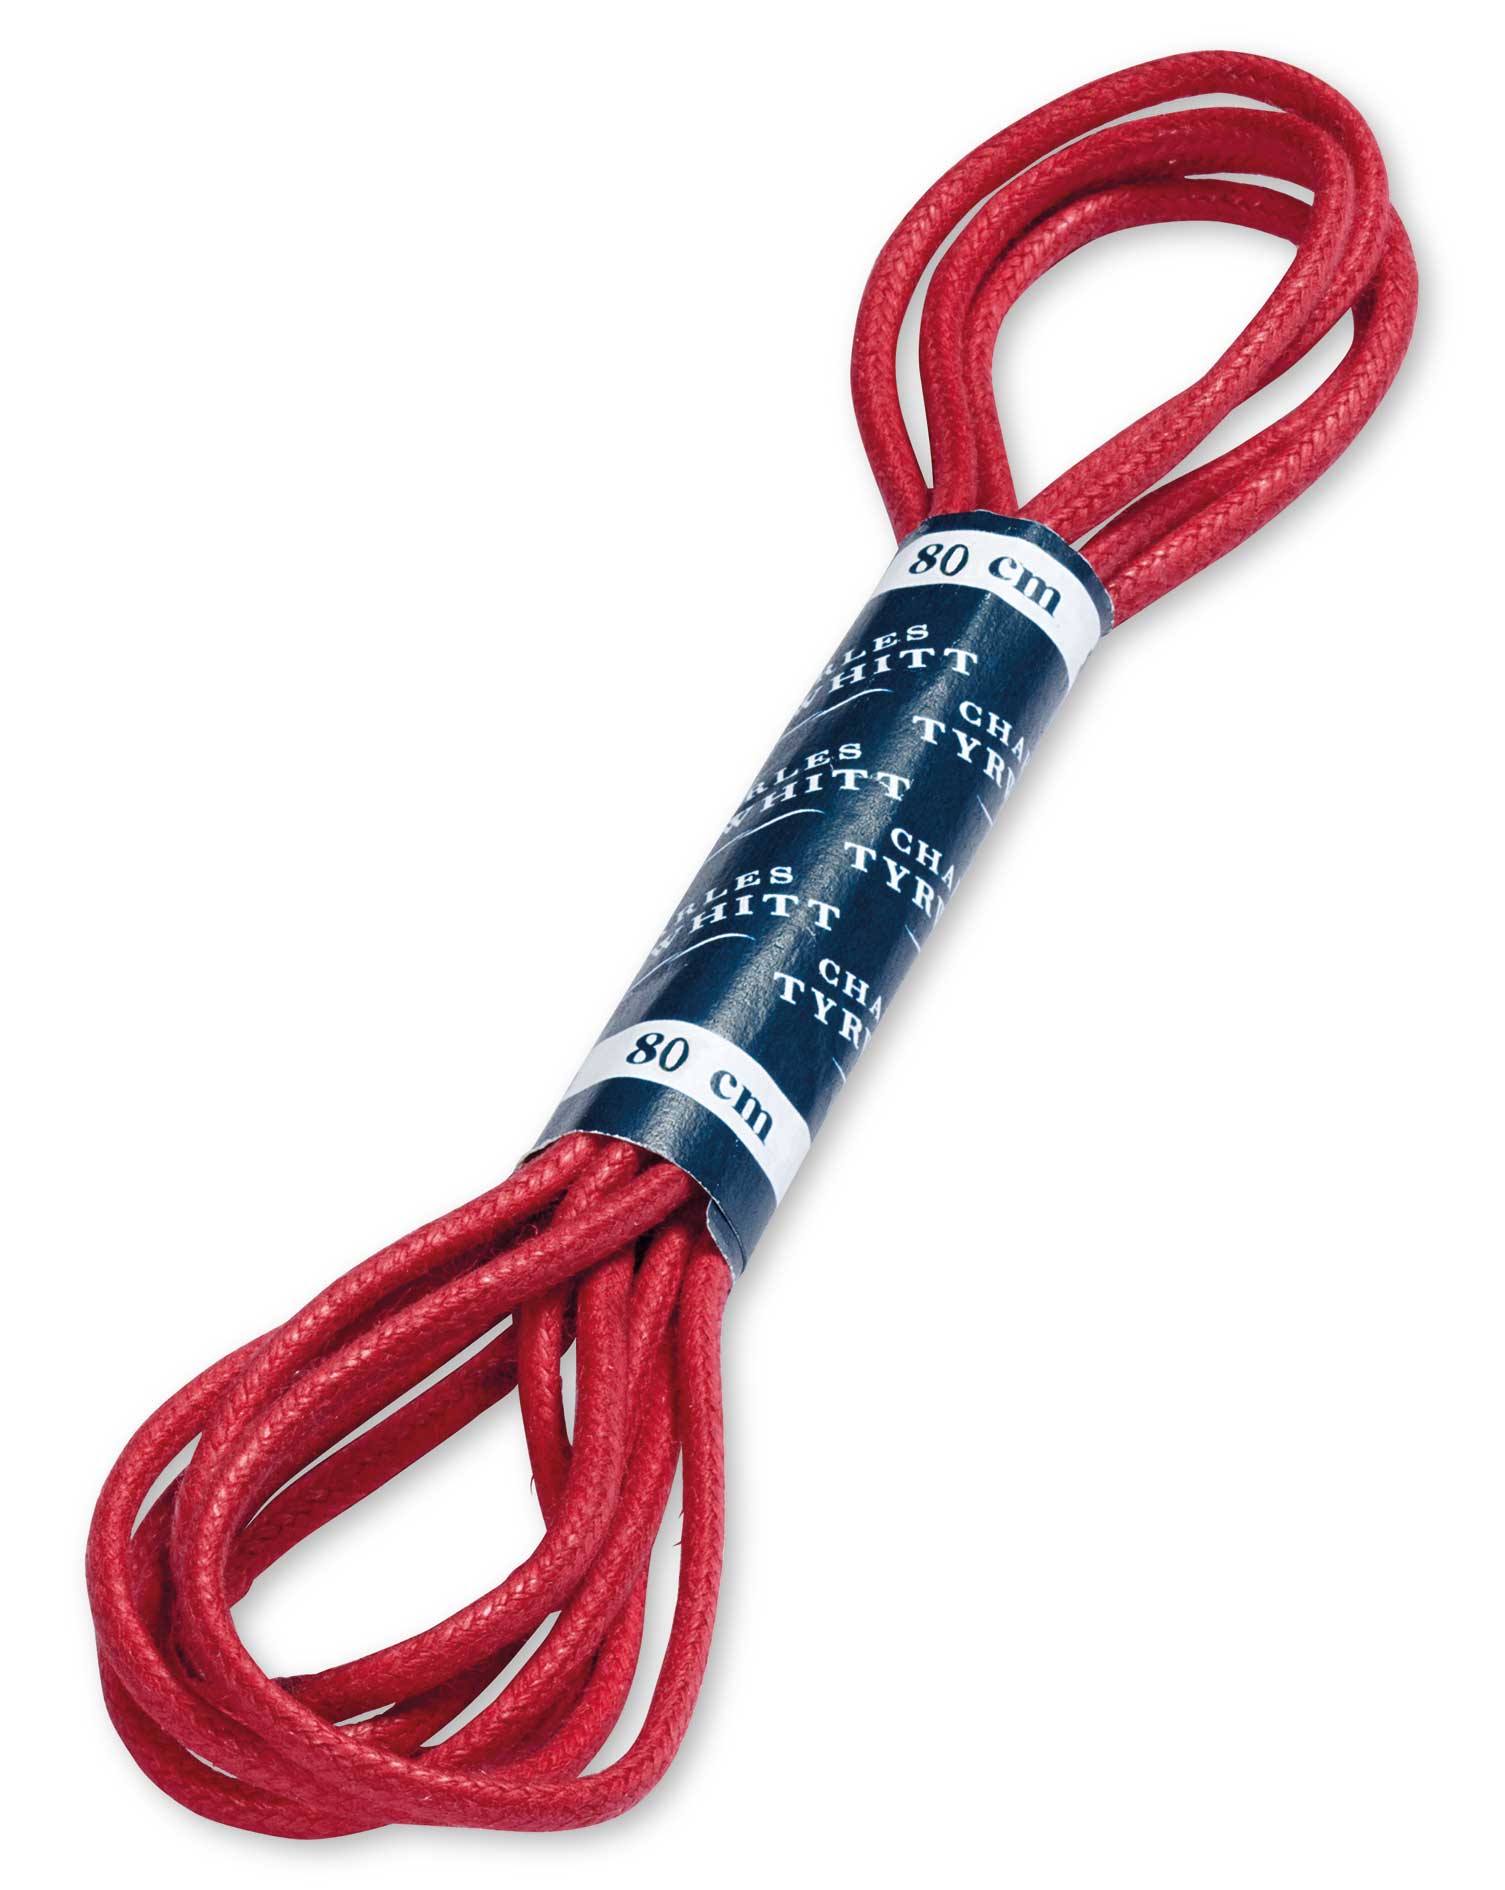 Red shoe laces Charles Tyrwhitt